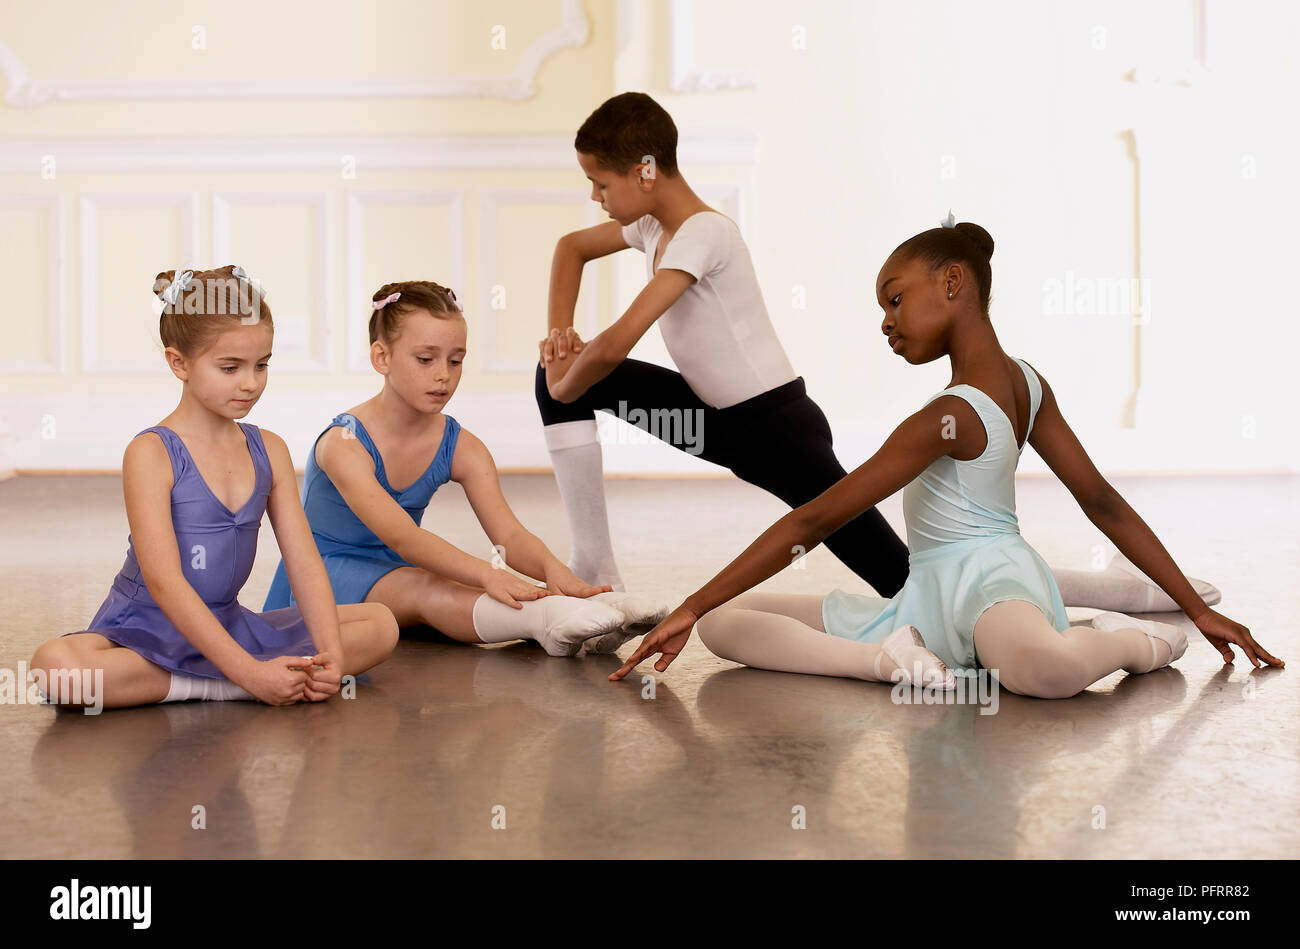 Group of young ballet dancers doing stretching exercises Stock Photo